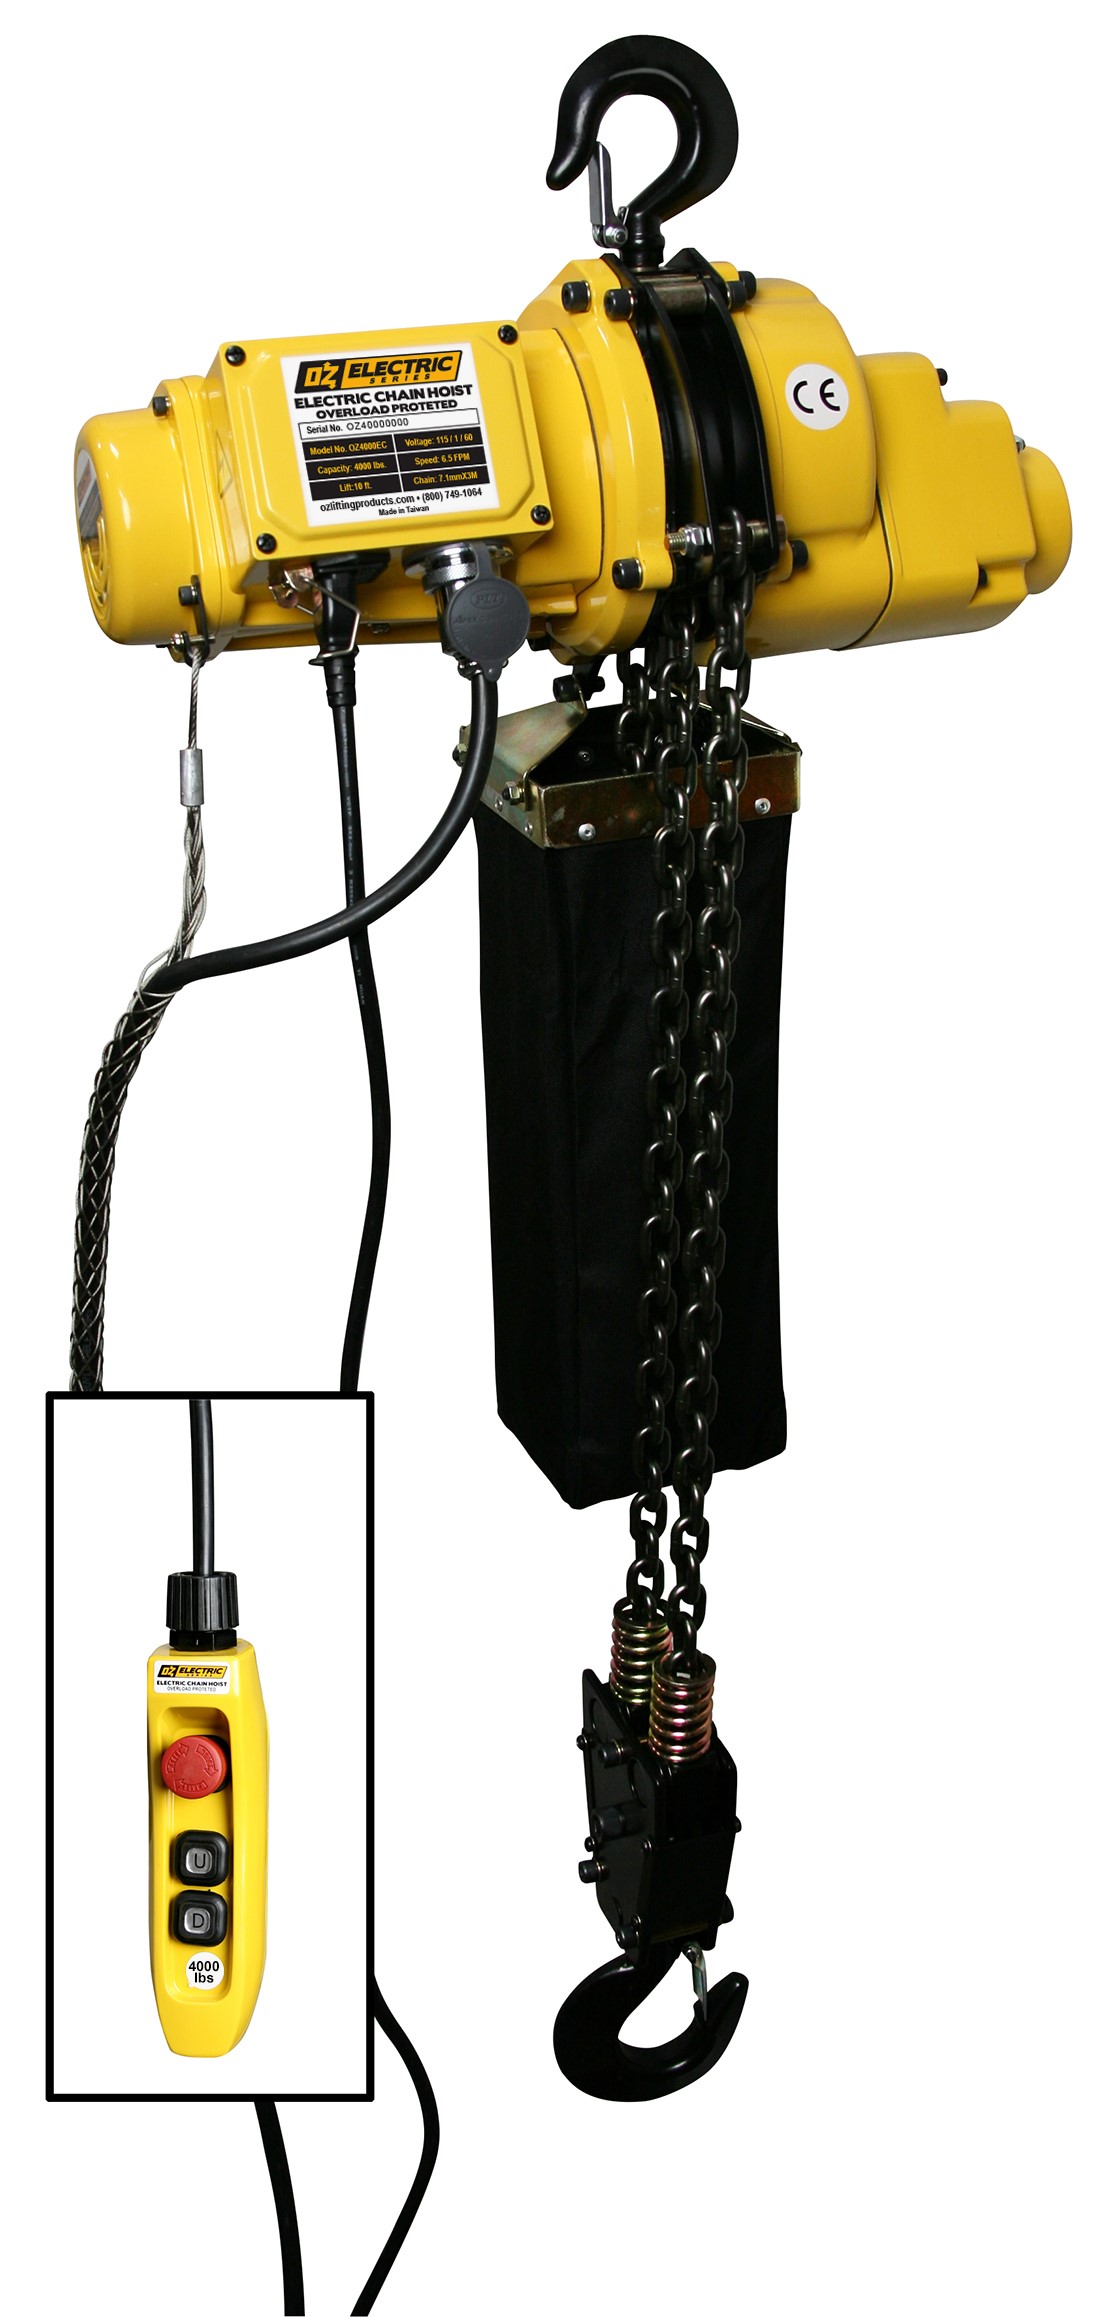 OZ Lifting Products has added the 4,000-lb. capacity OZ4000EC to its range of electric chain hoists.